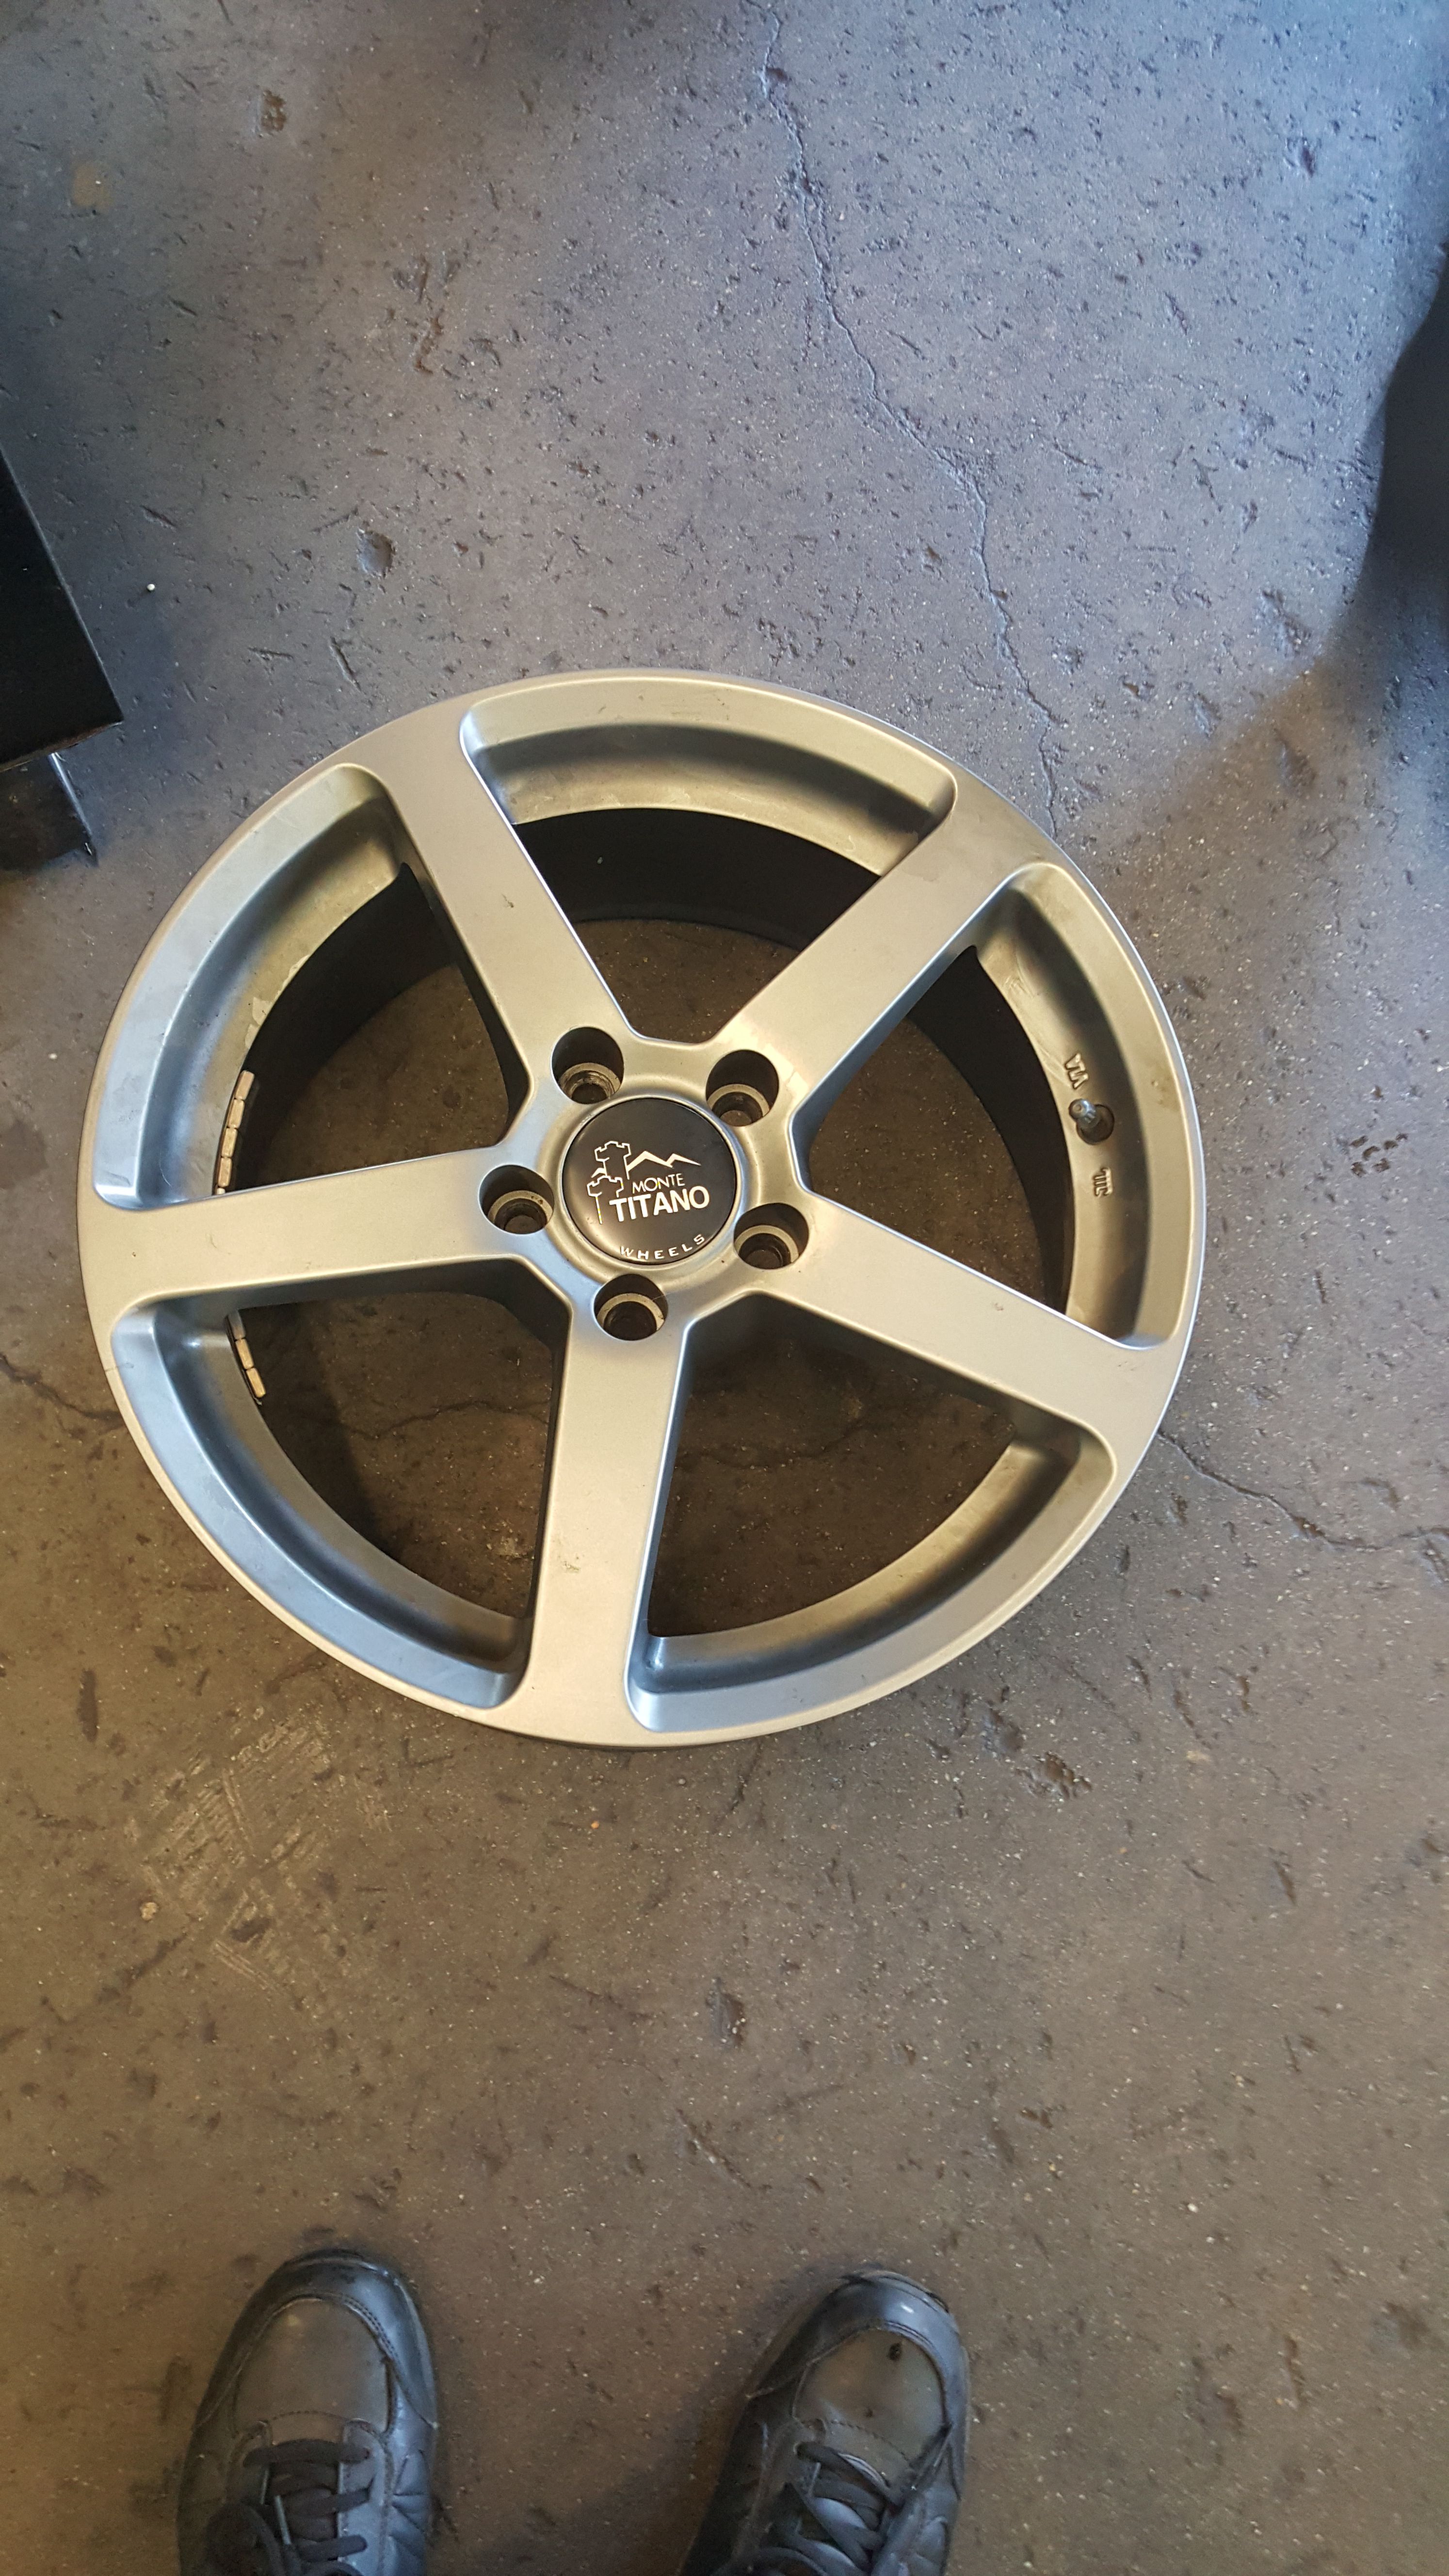 17×7.5 5bult by 115